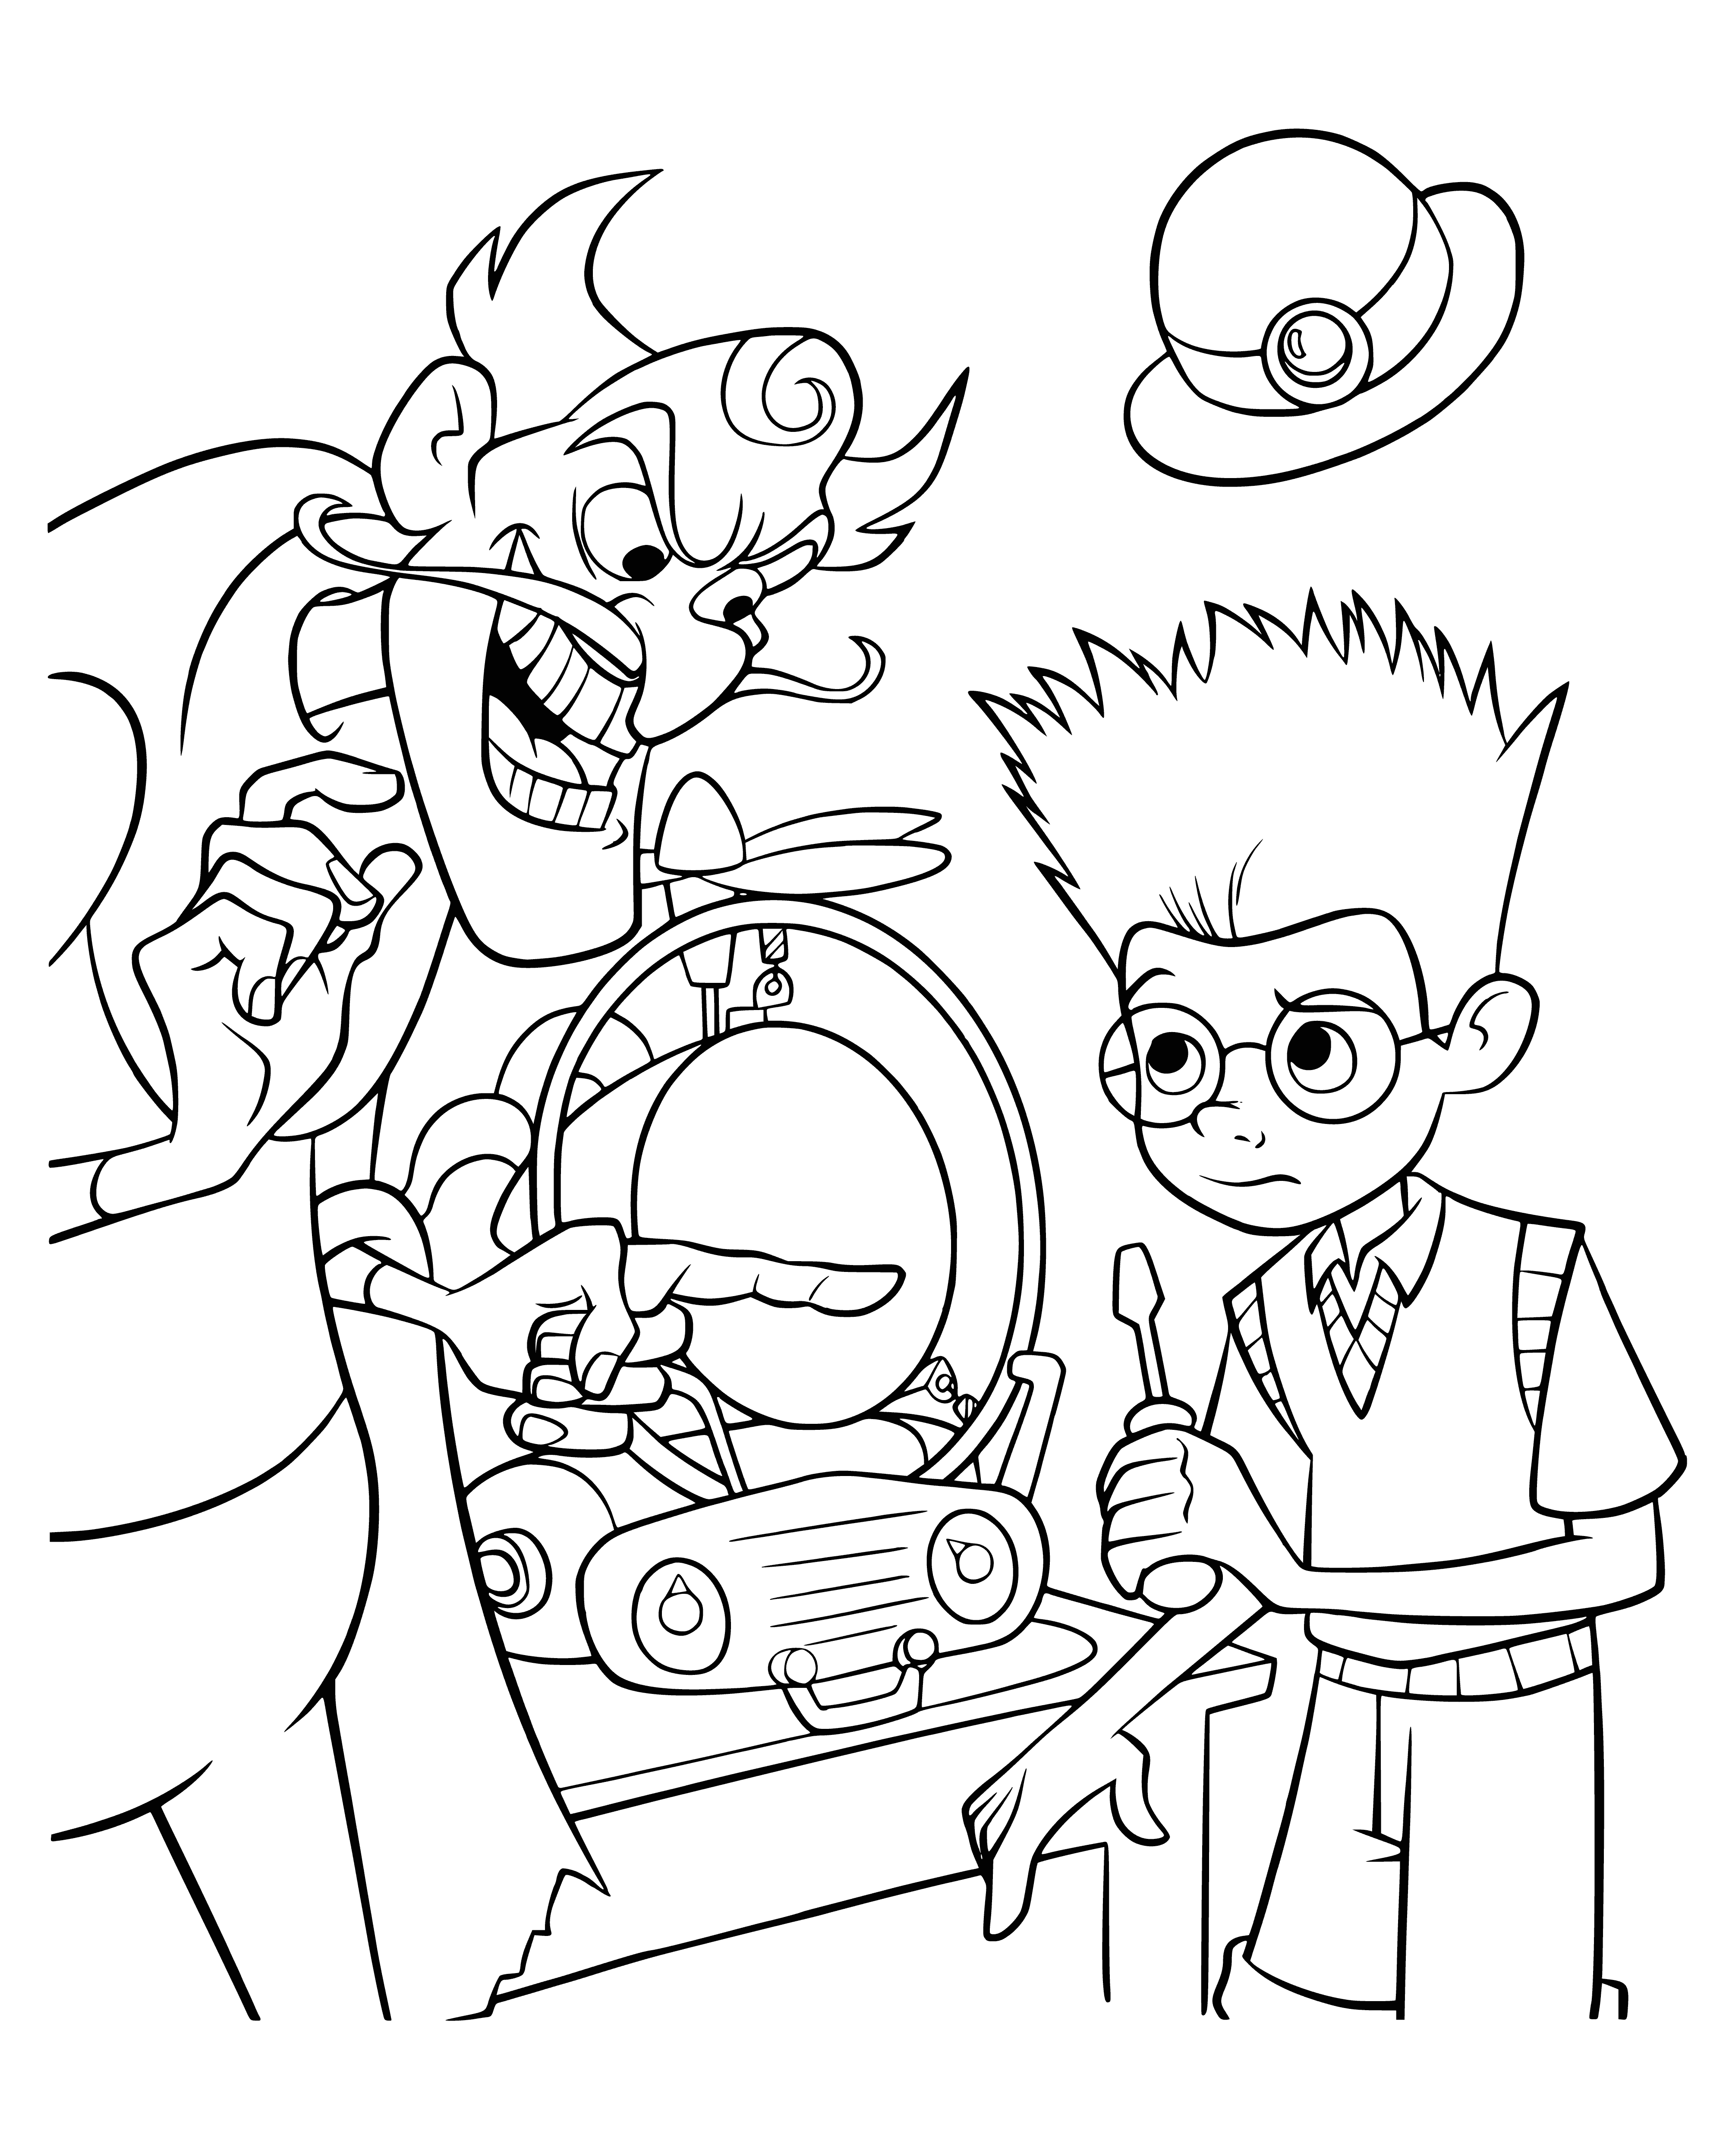 Villain and Lewis coloring page